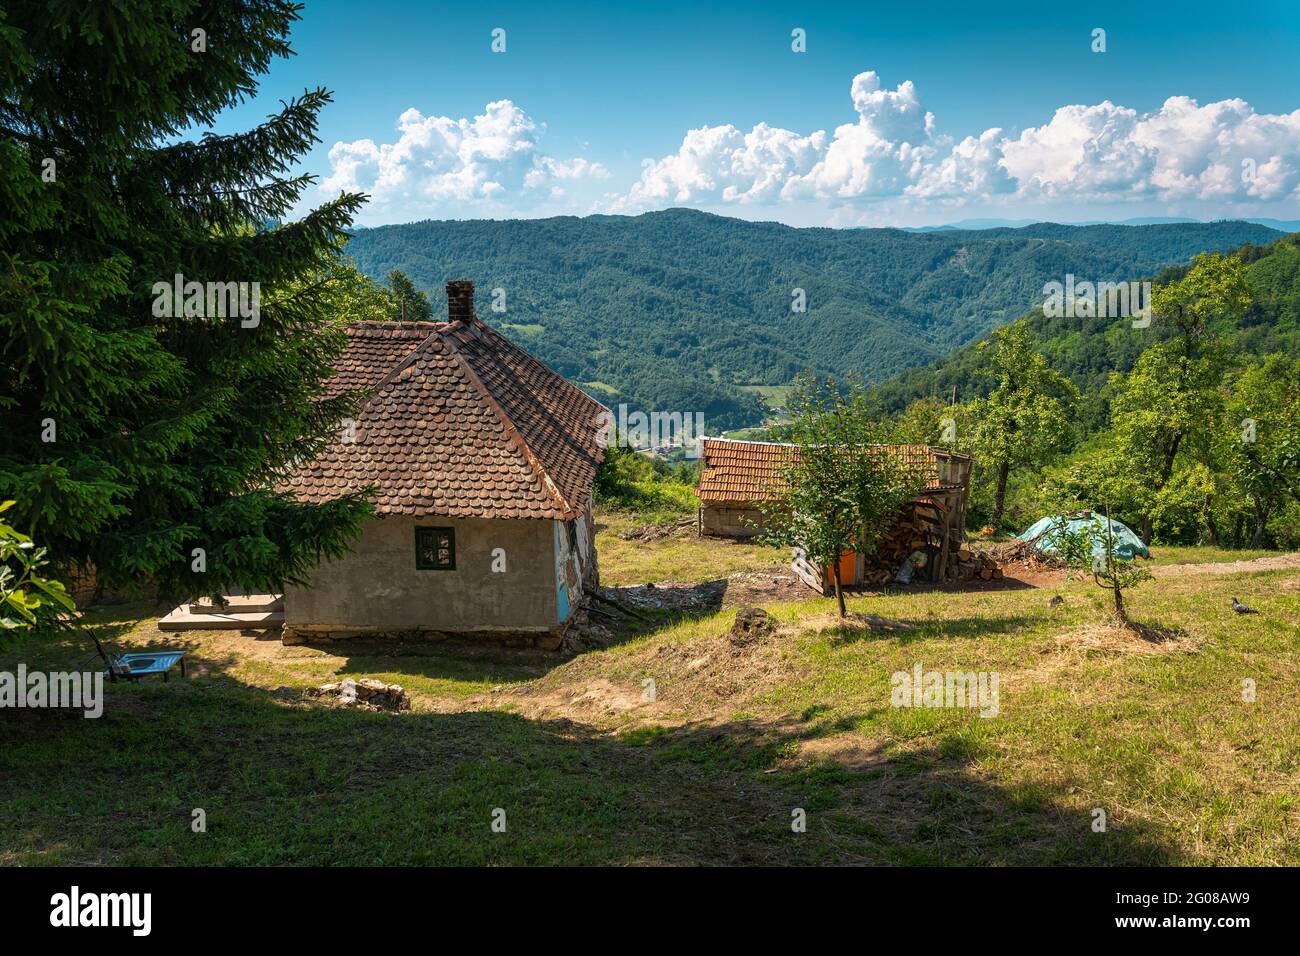 Old rundown household in the beautiful countryside Stock Photo